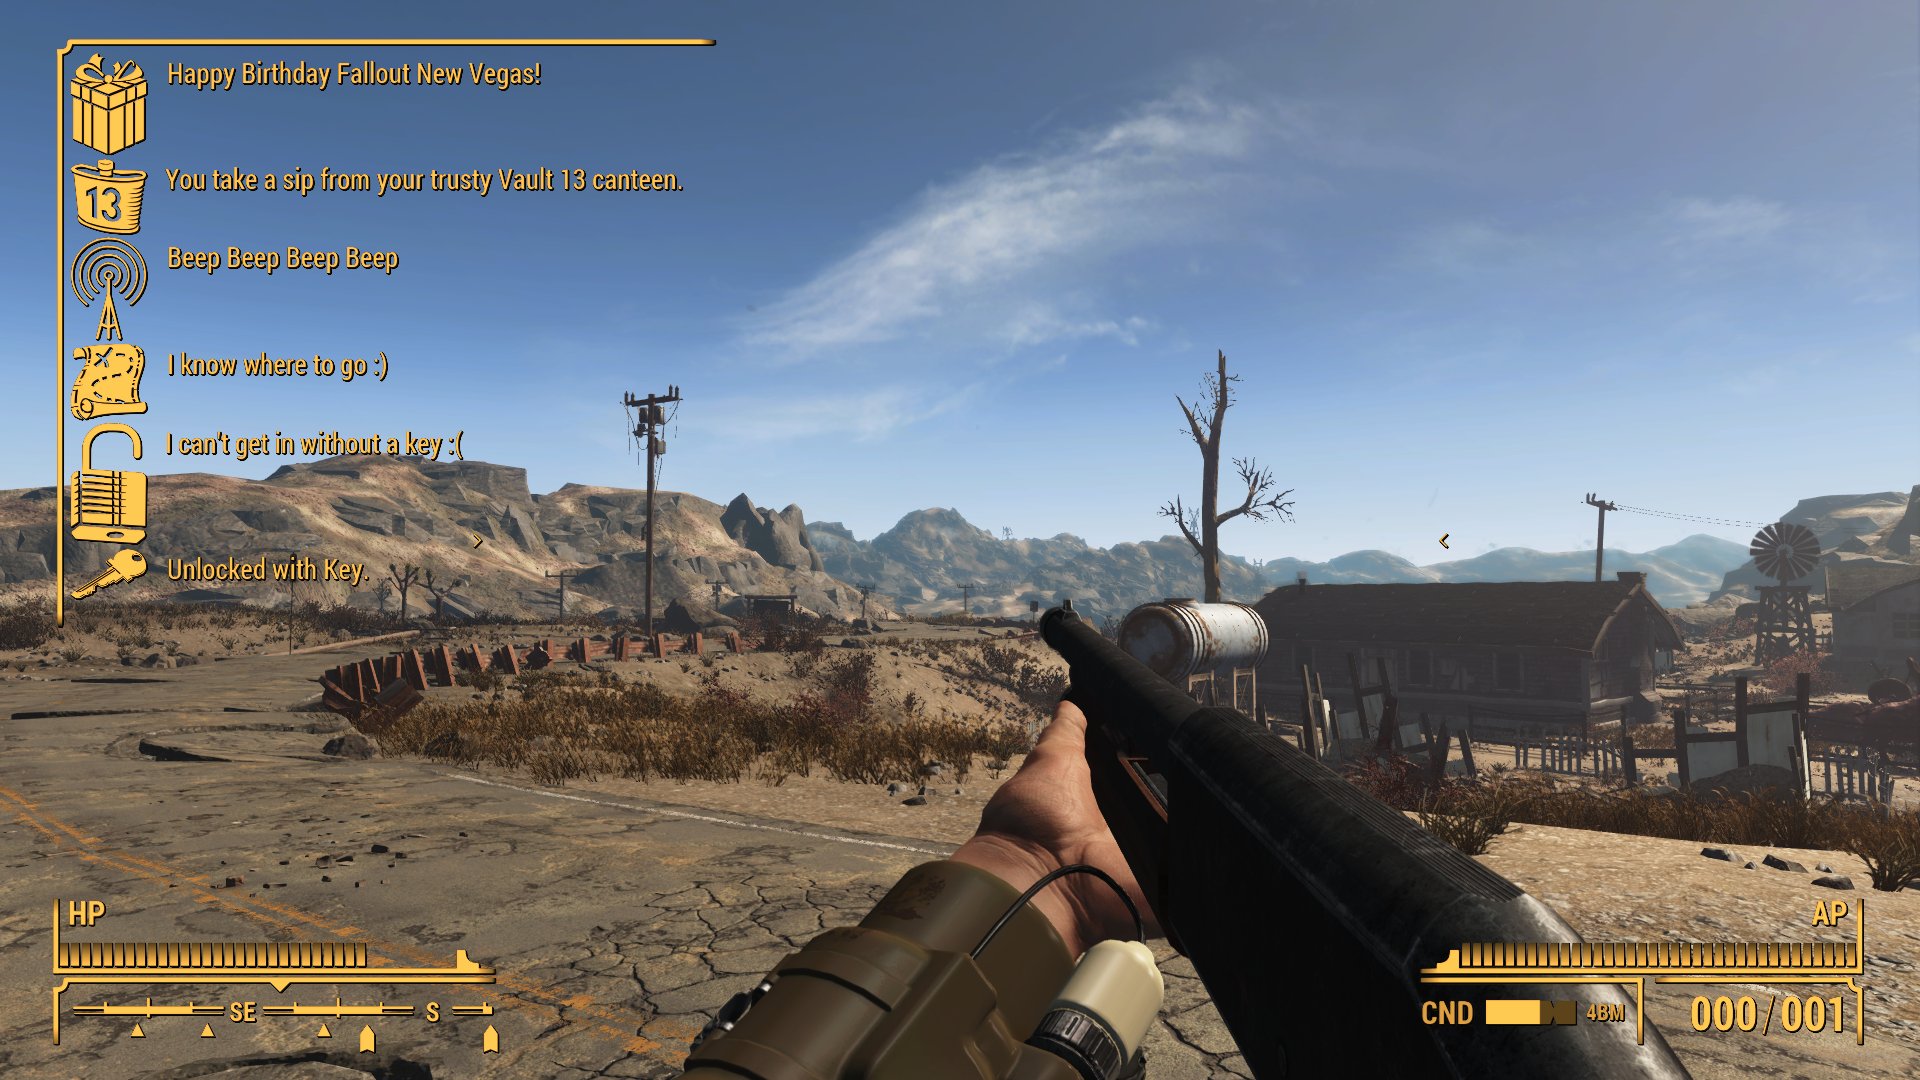 Fallout 4 New Vegas Fan Remake Showcased in New Gameplay Video